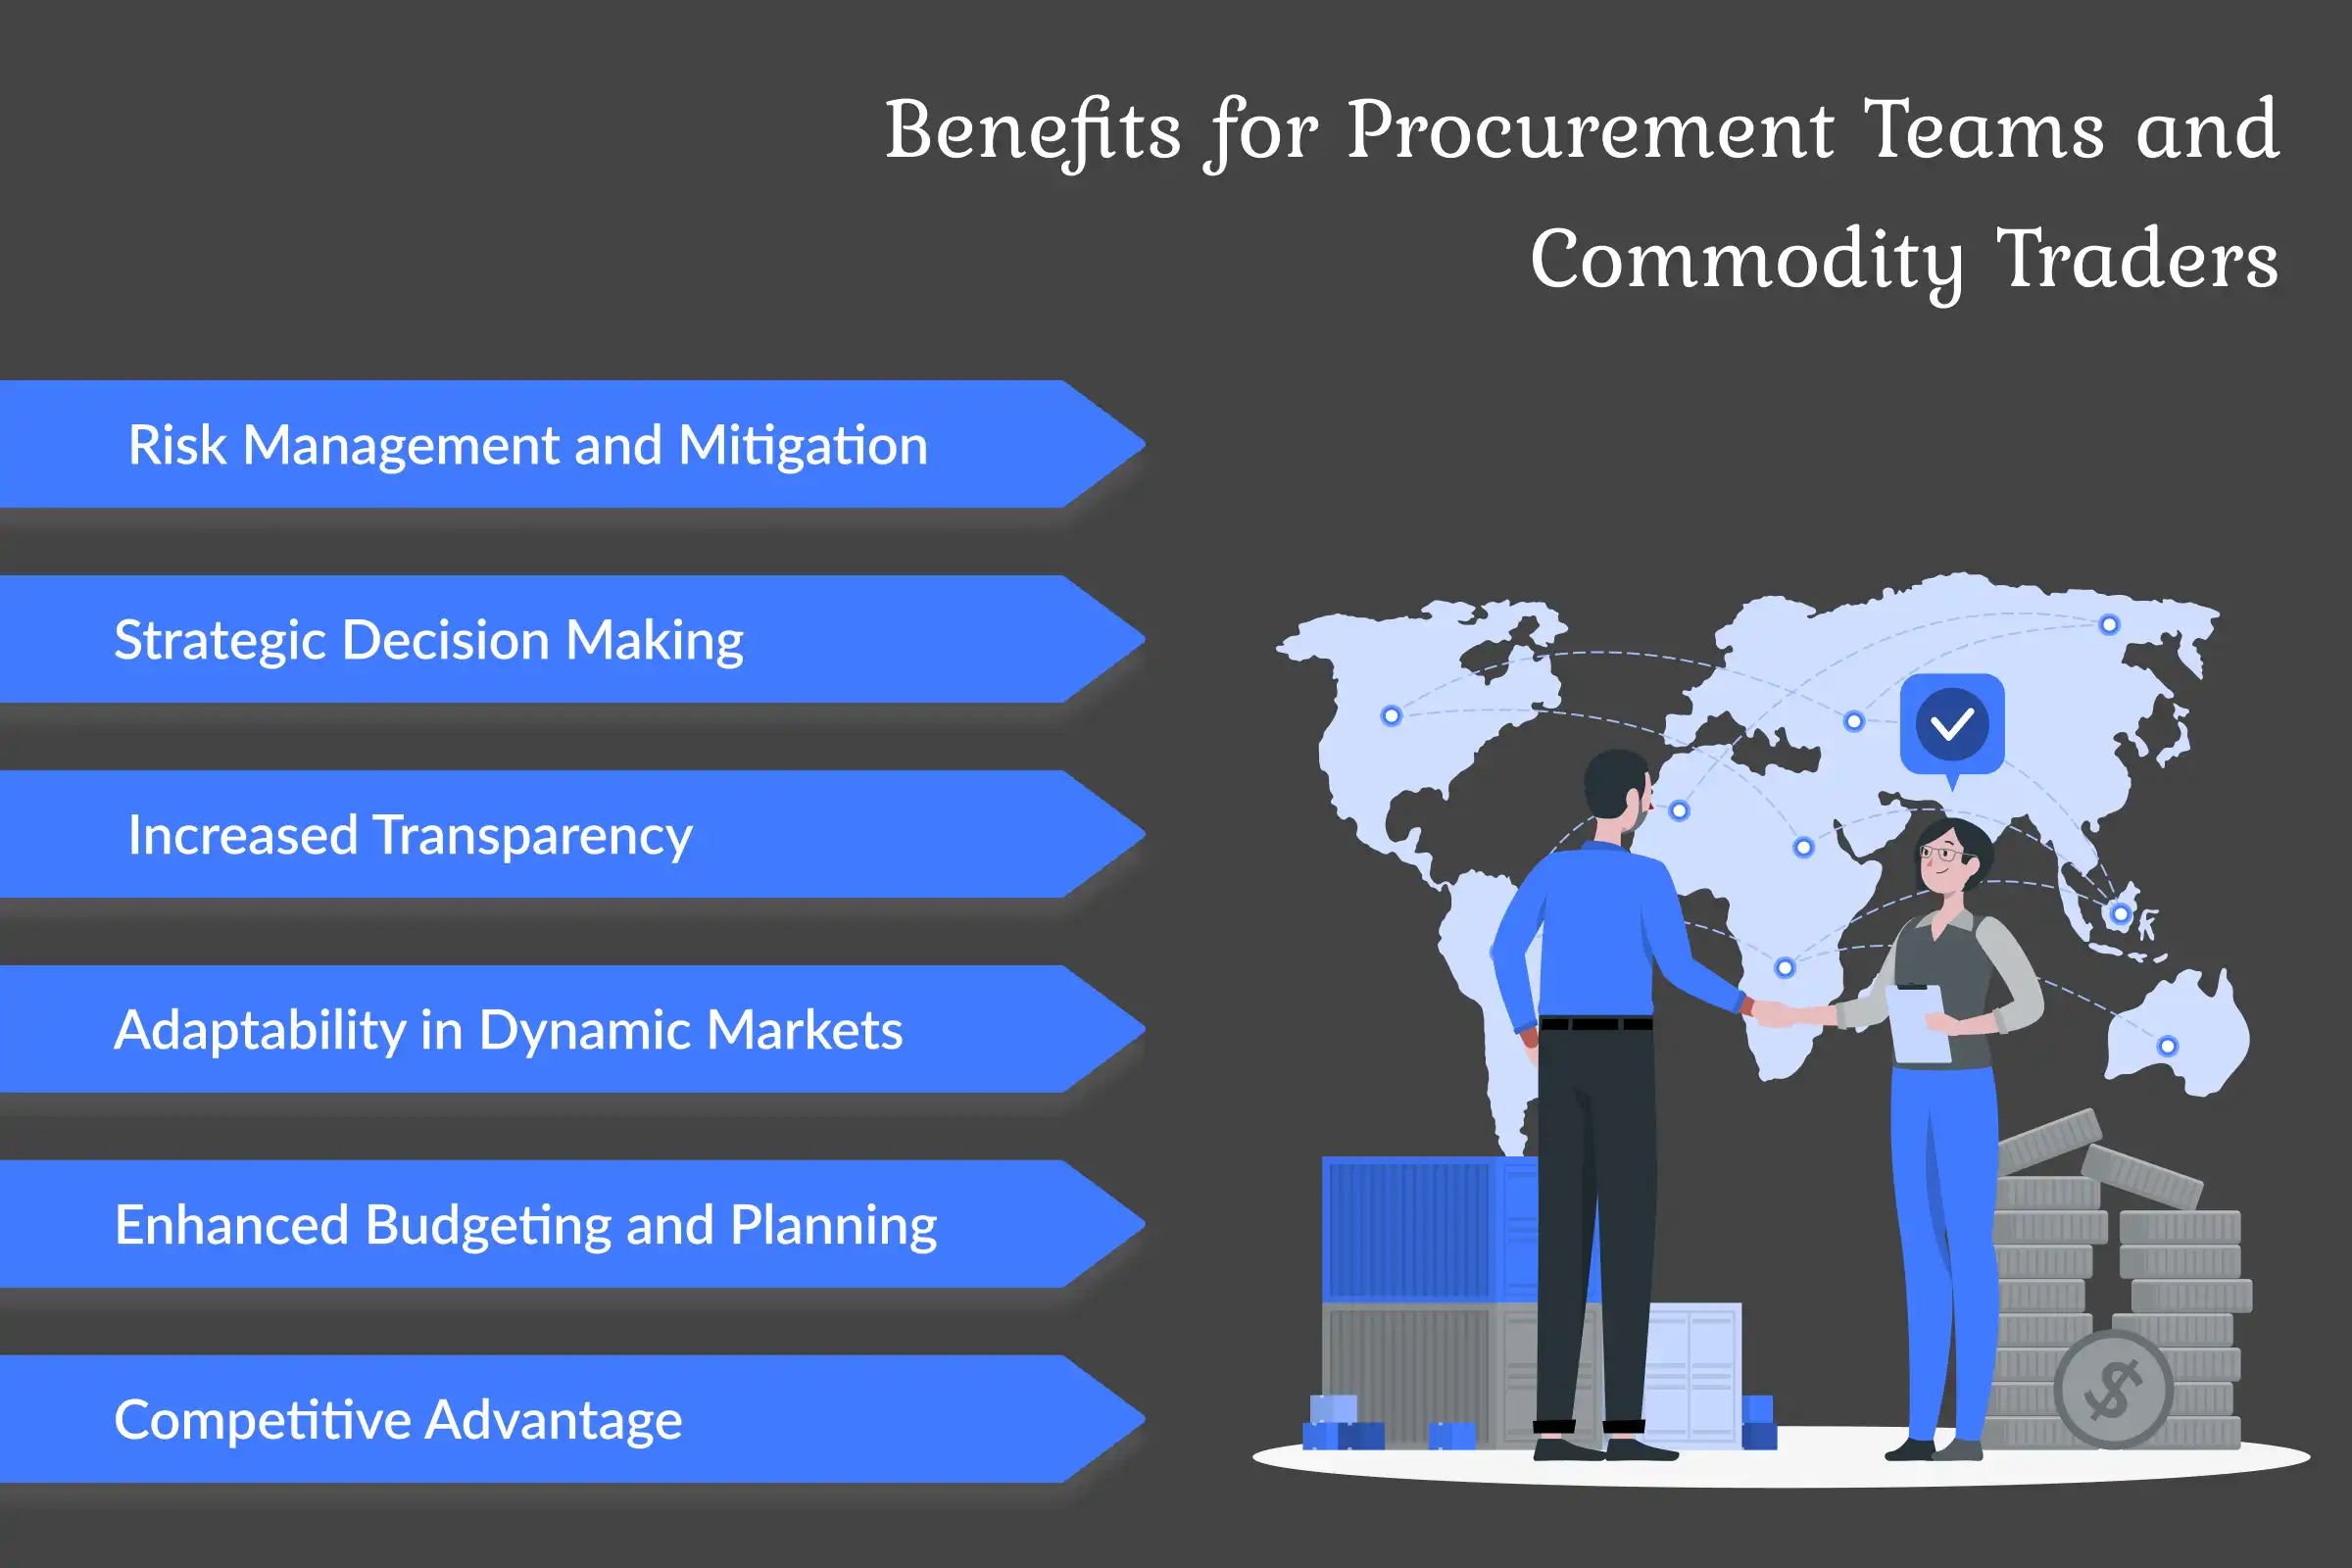 Benefits for Procurement Teams and Commodity Traders